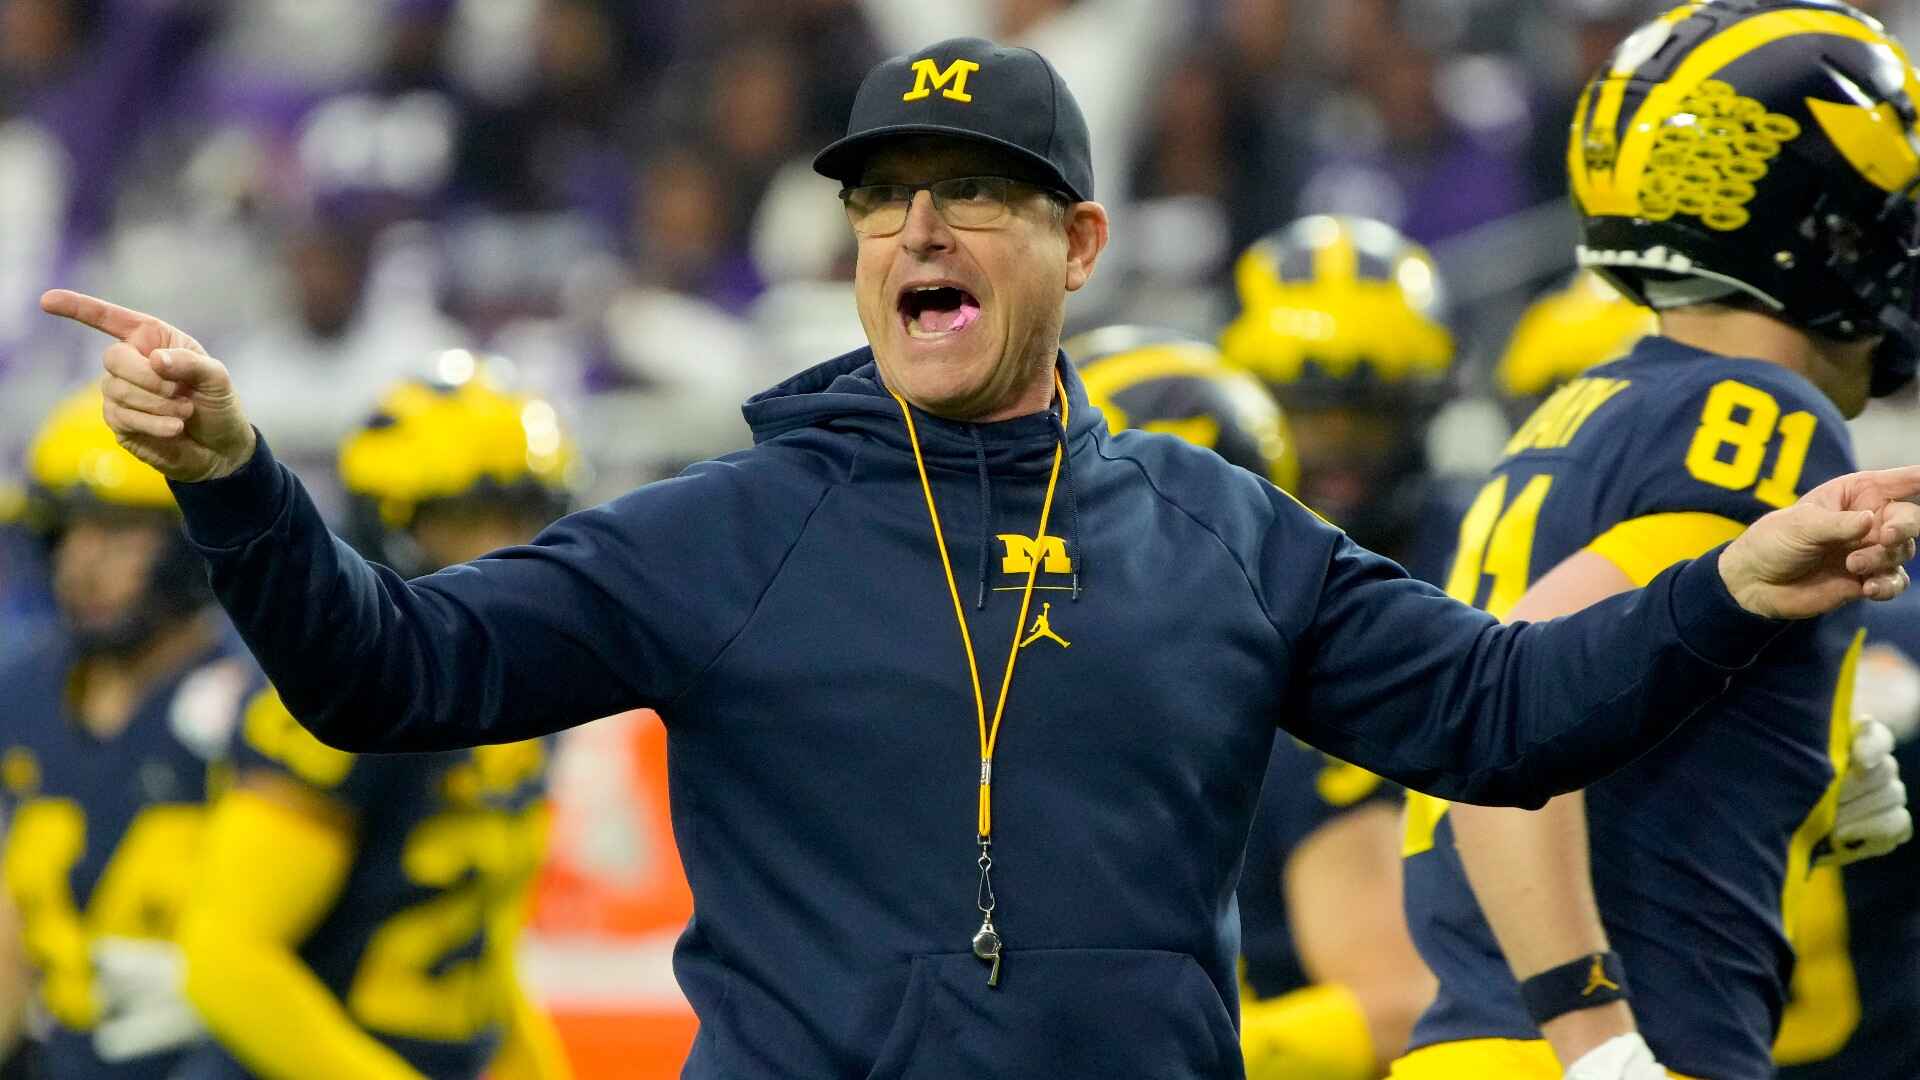 Michigan’s Jim Harbaugh Suspended For Rest Of Regular Season Over Alleged Sign-Stealing Scandal